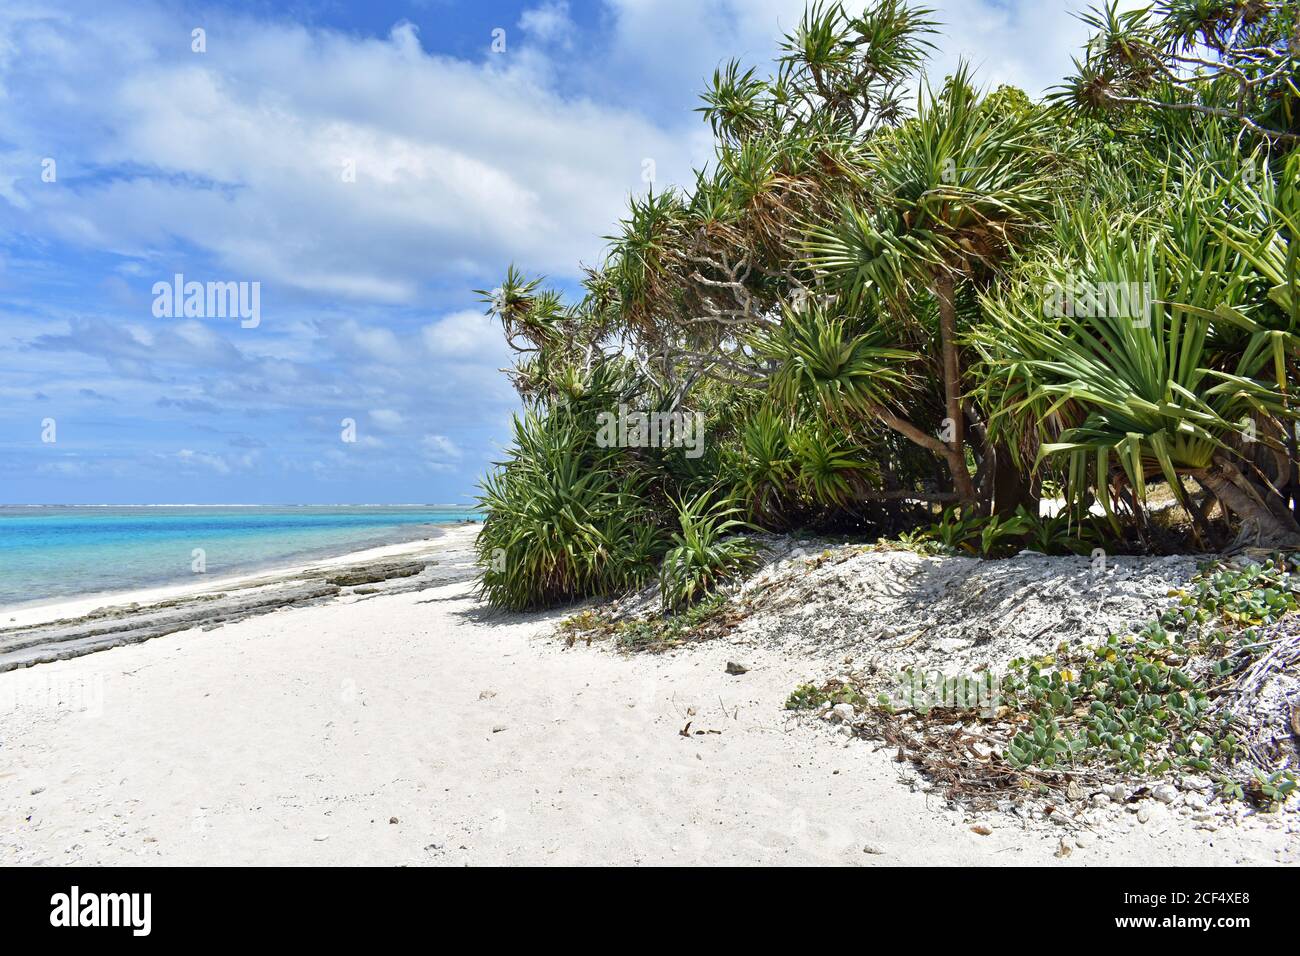 A deserted white sand beach on the South Pacific Island of Mystery Island, Vanuatu.   Green tropical foliage and a bright blue ocean frame the beach. Stock Photo